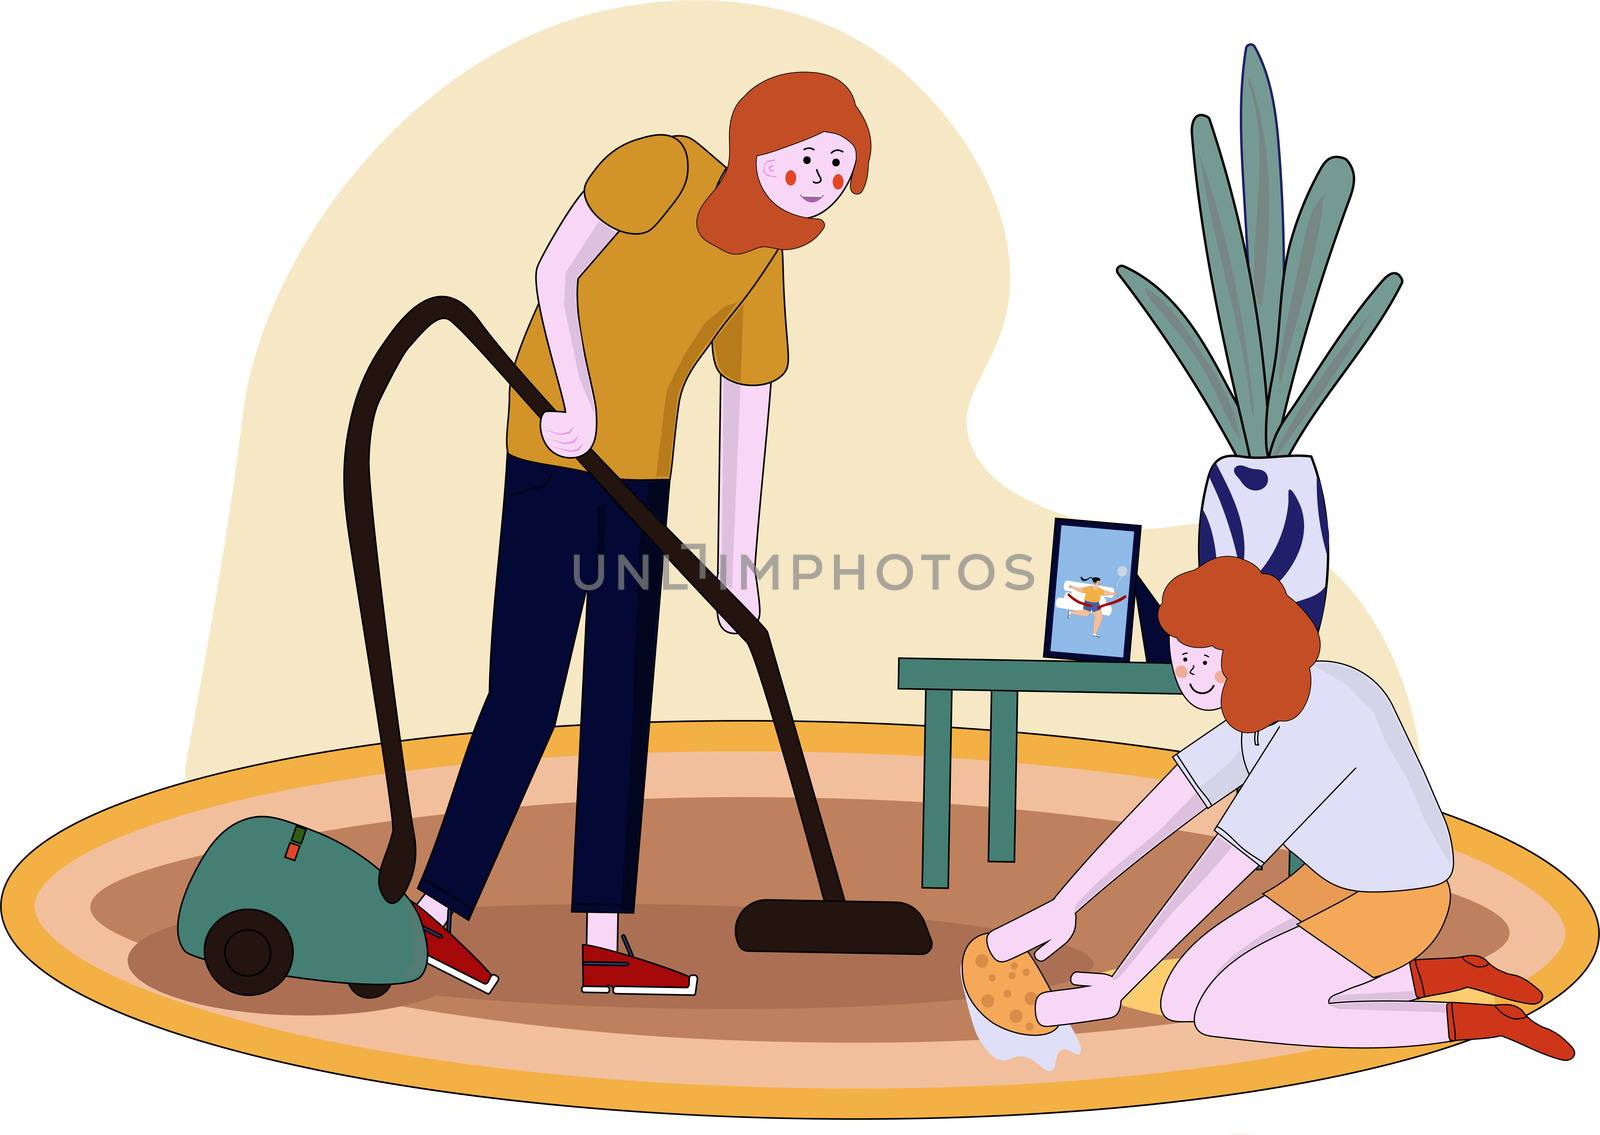 Mother and little daughter Cartoon housework. A young woman and a girl are washing the floor. The woman vacuums. cleaning the house and dusting together